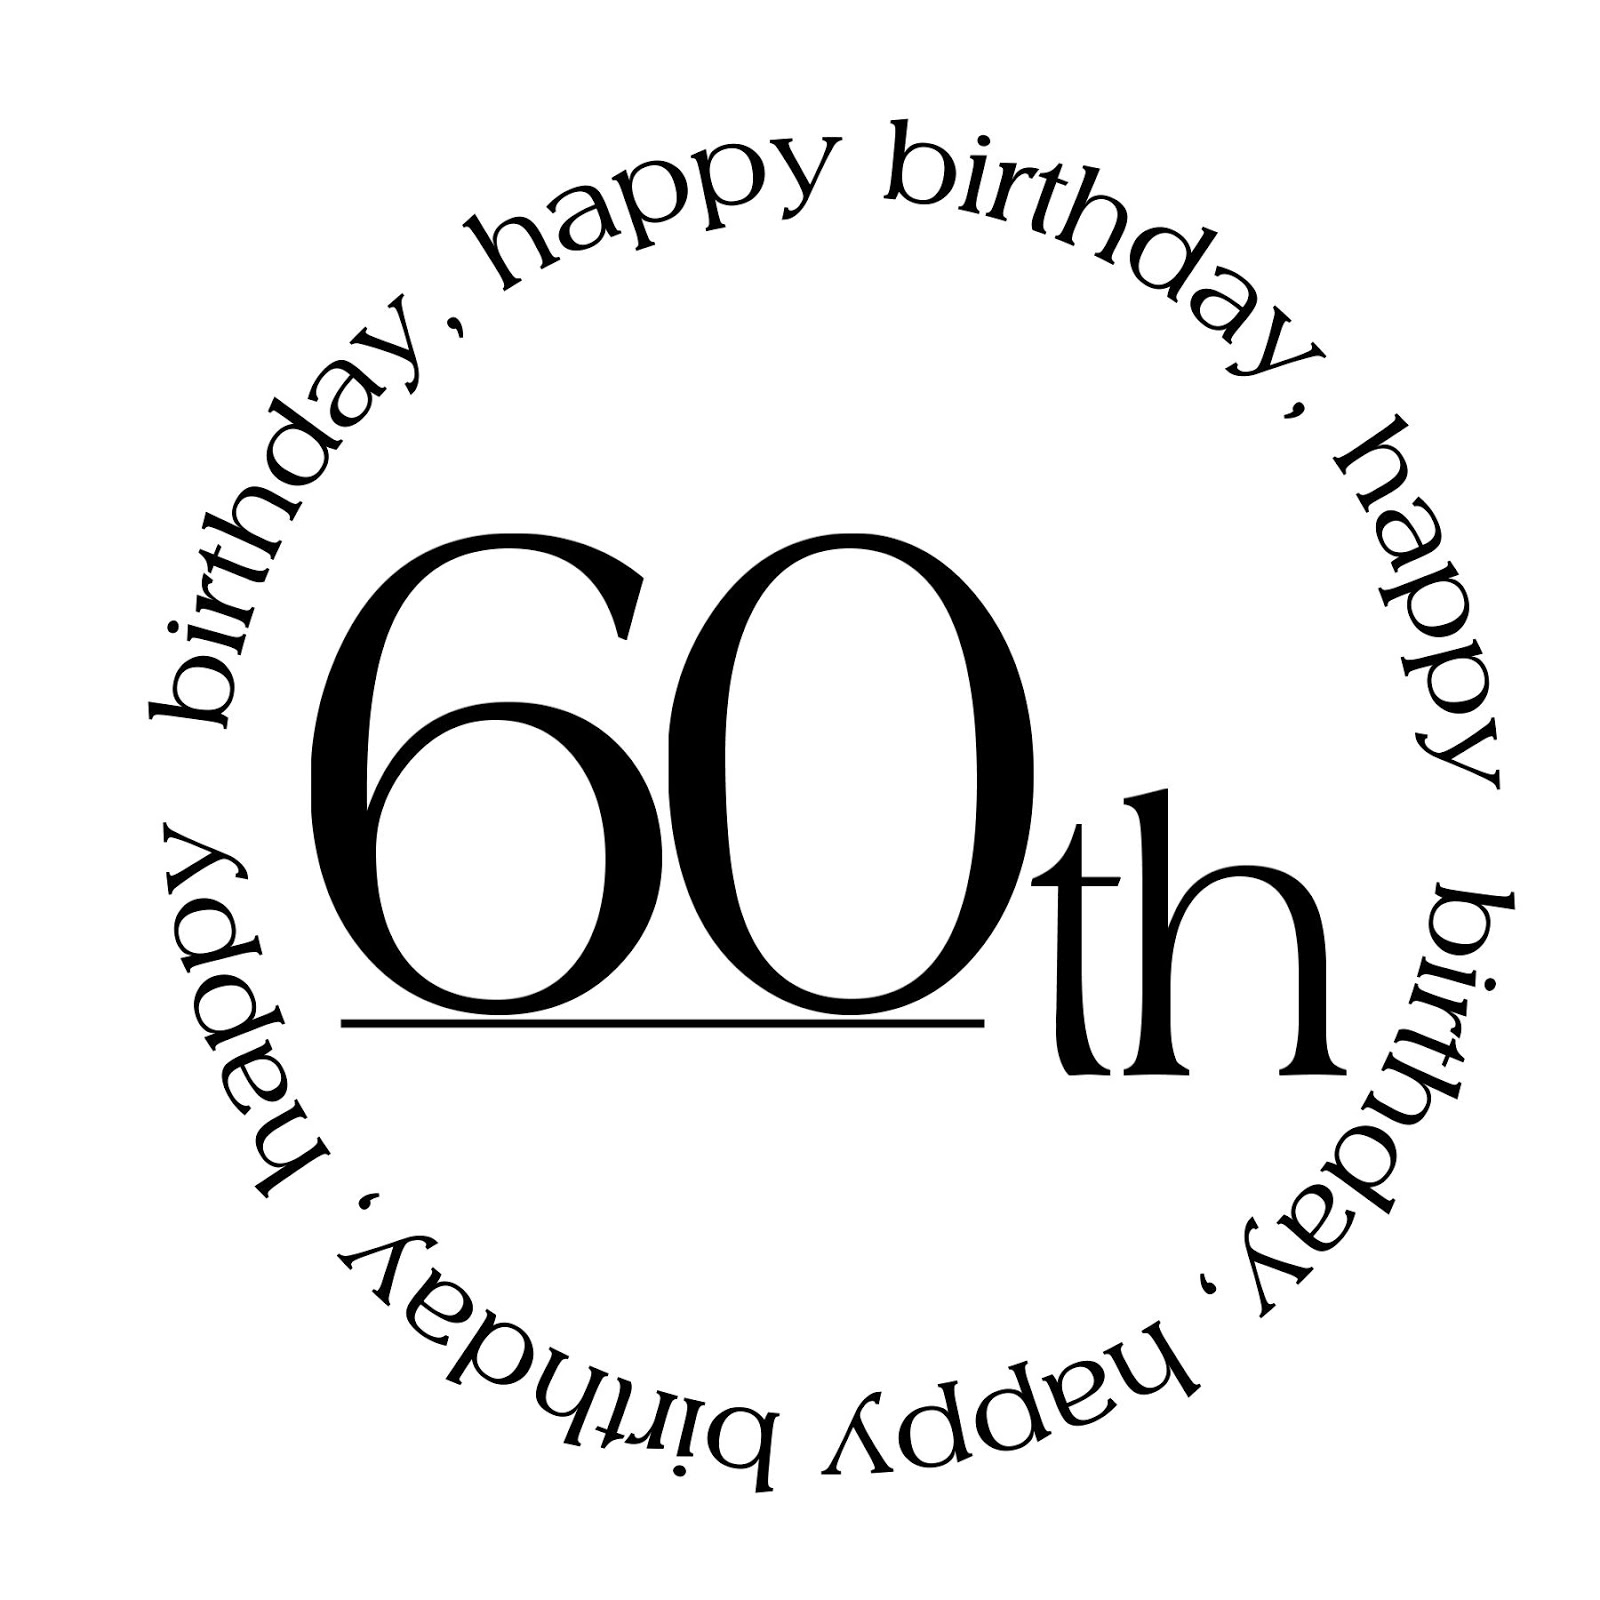 create-with-tlc-60th-birthday-printable